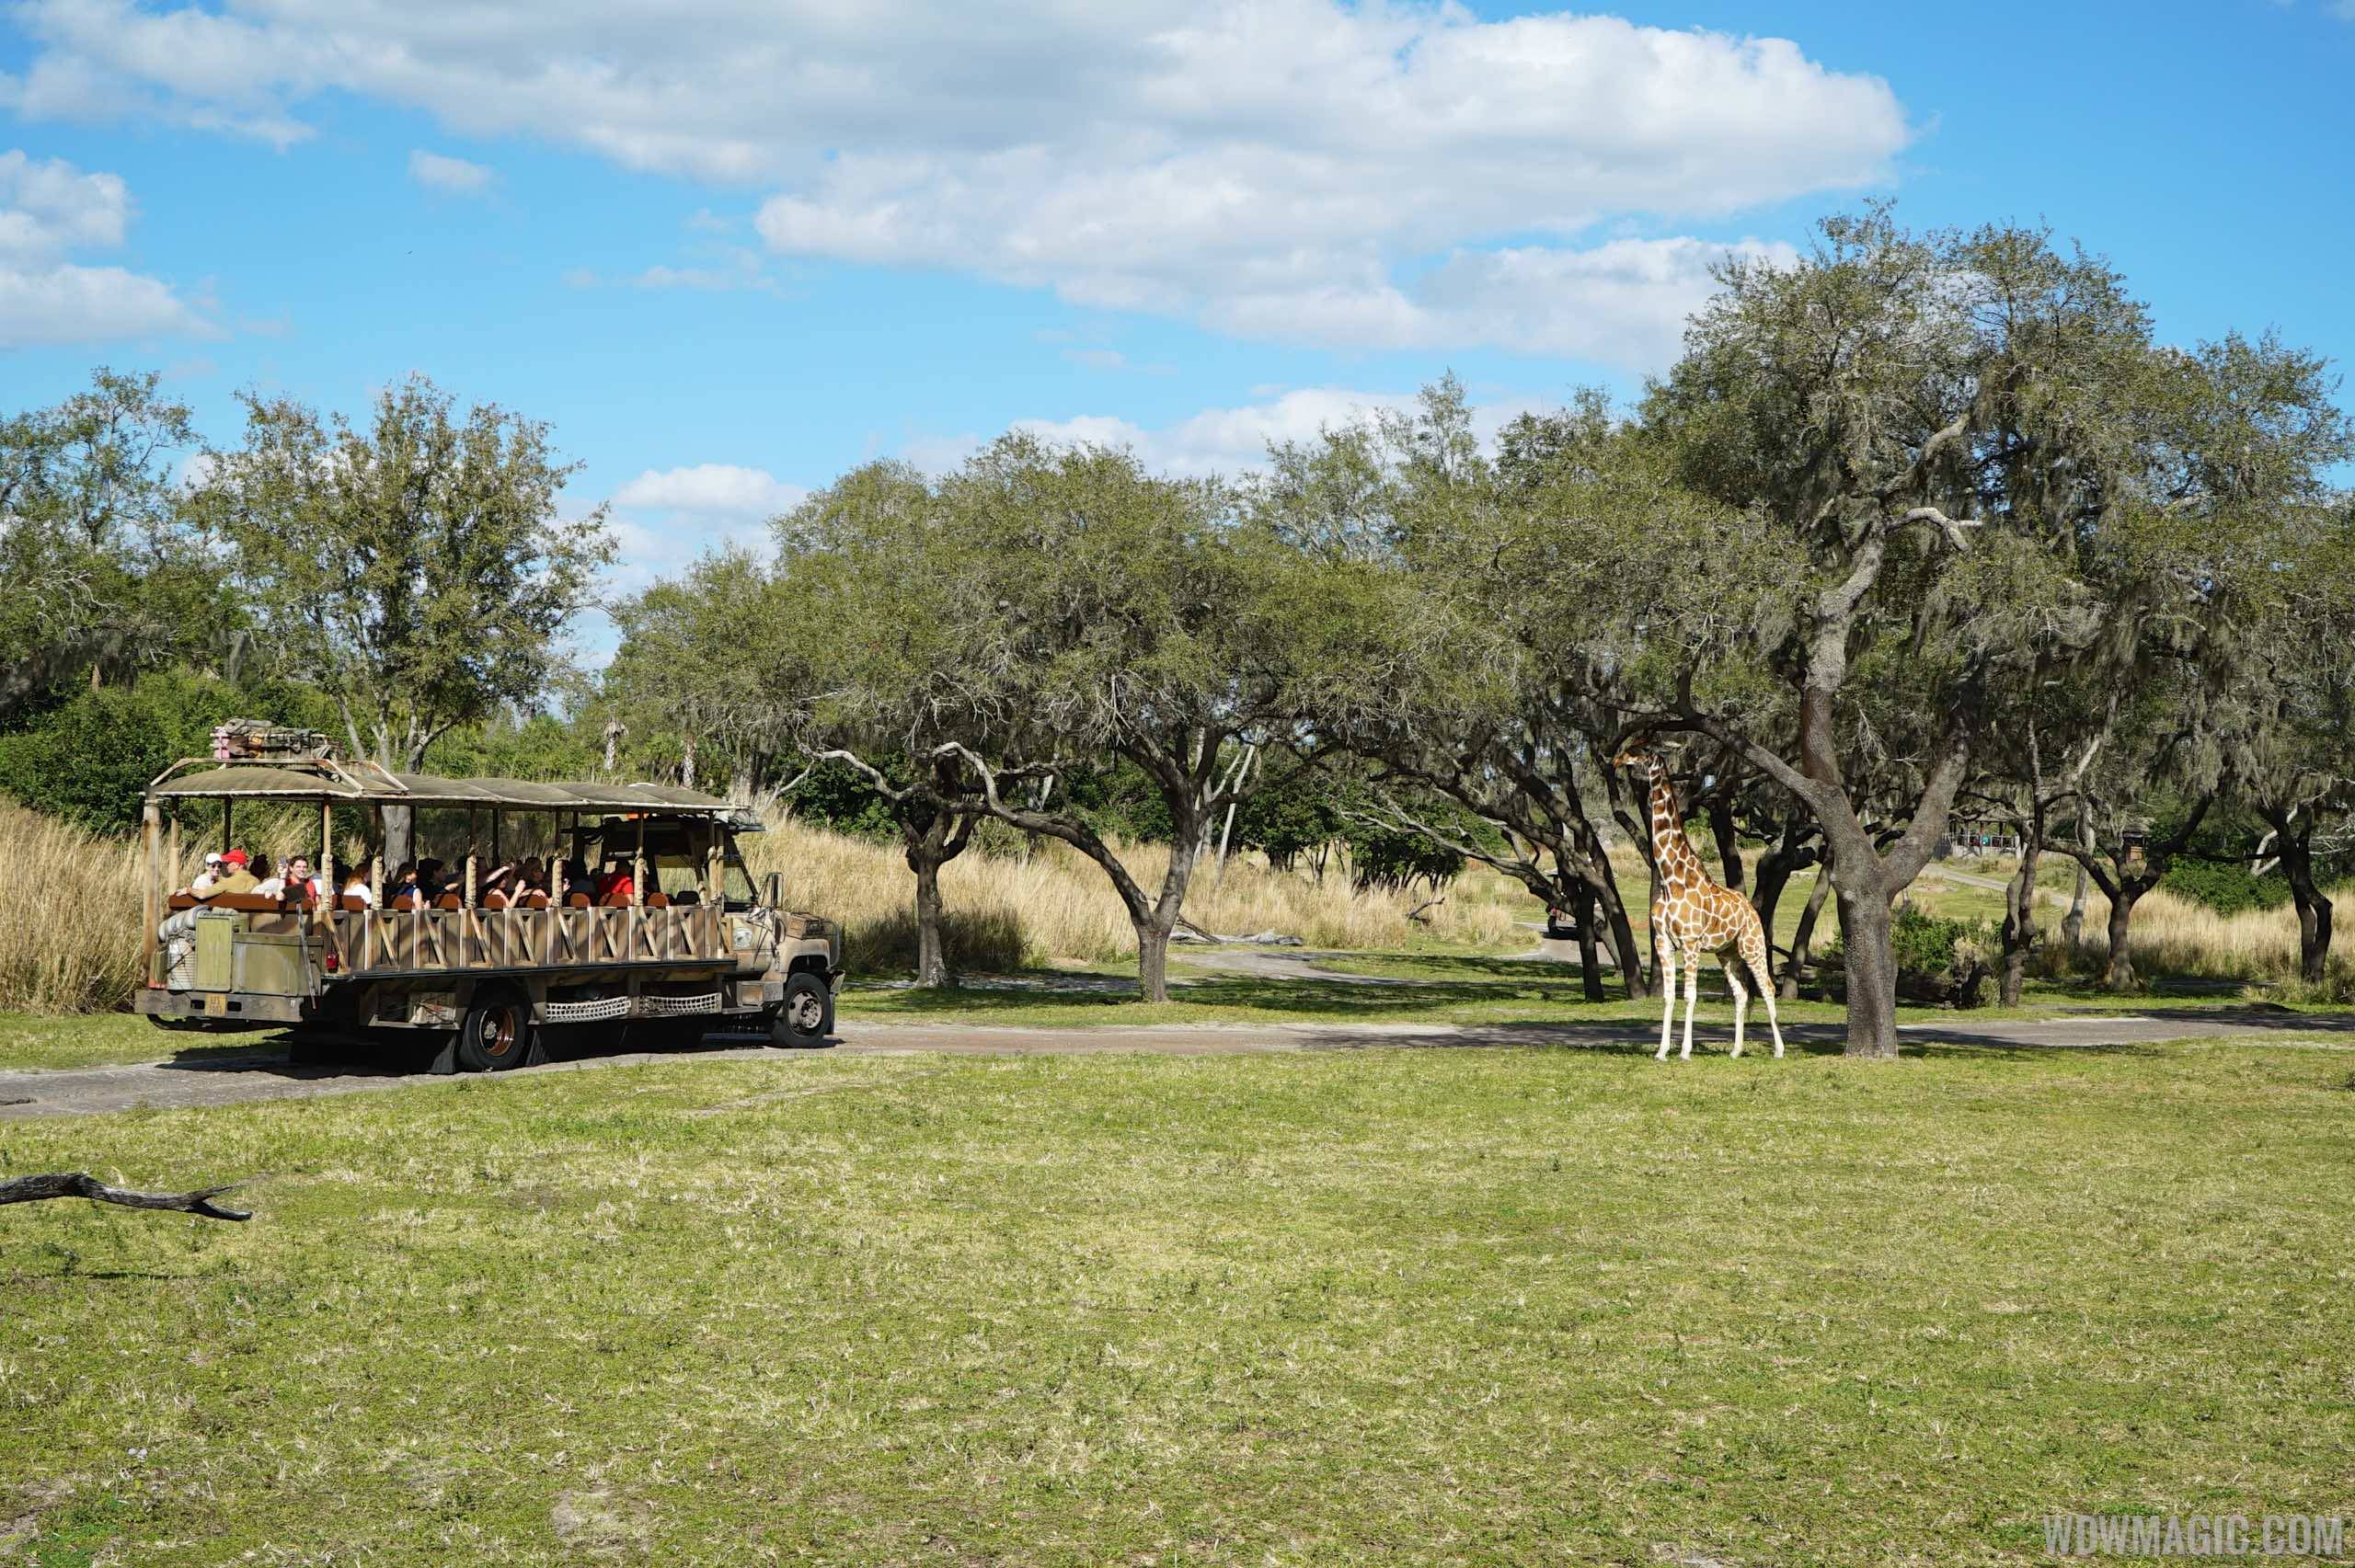 Kilimanjaro Safaris will be one of the stroller test attractions